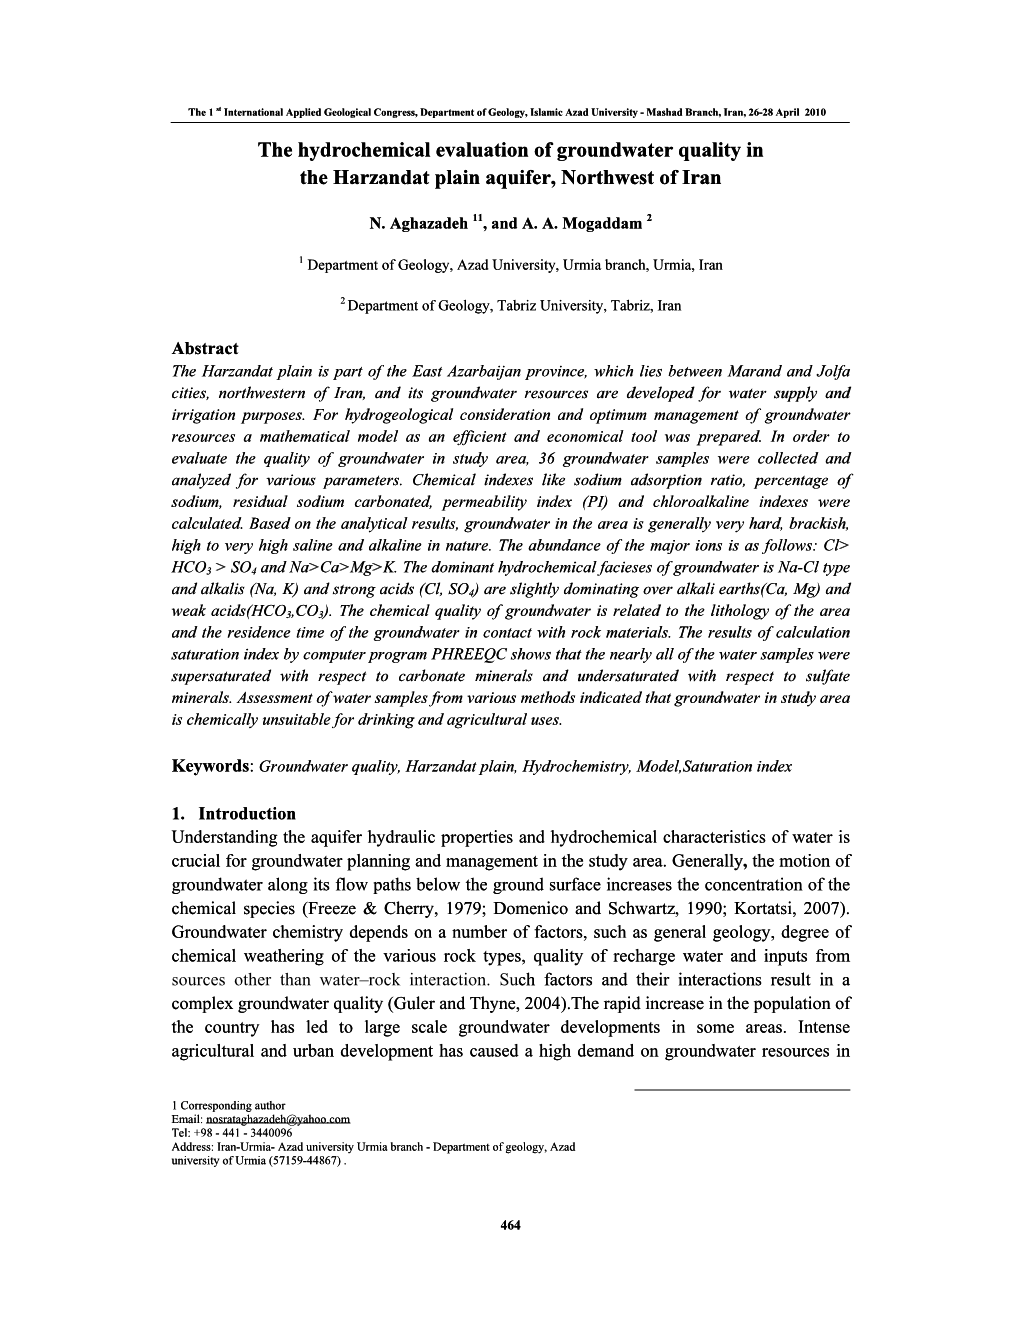 ۸۵.The Hydrochemical Evaluation of Groundwater Quality in The